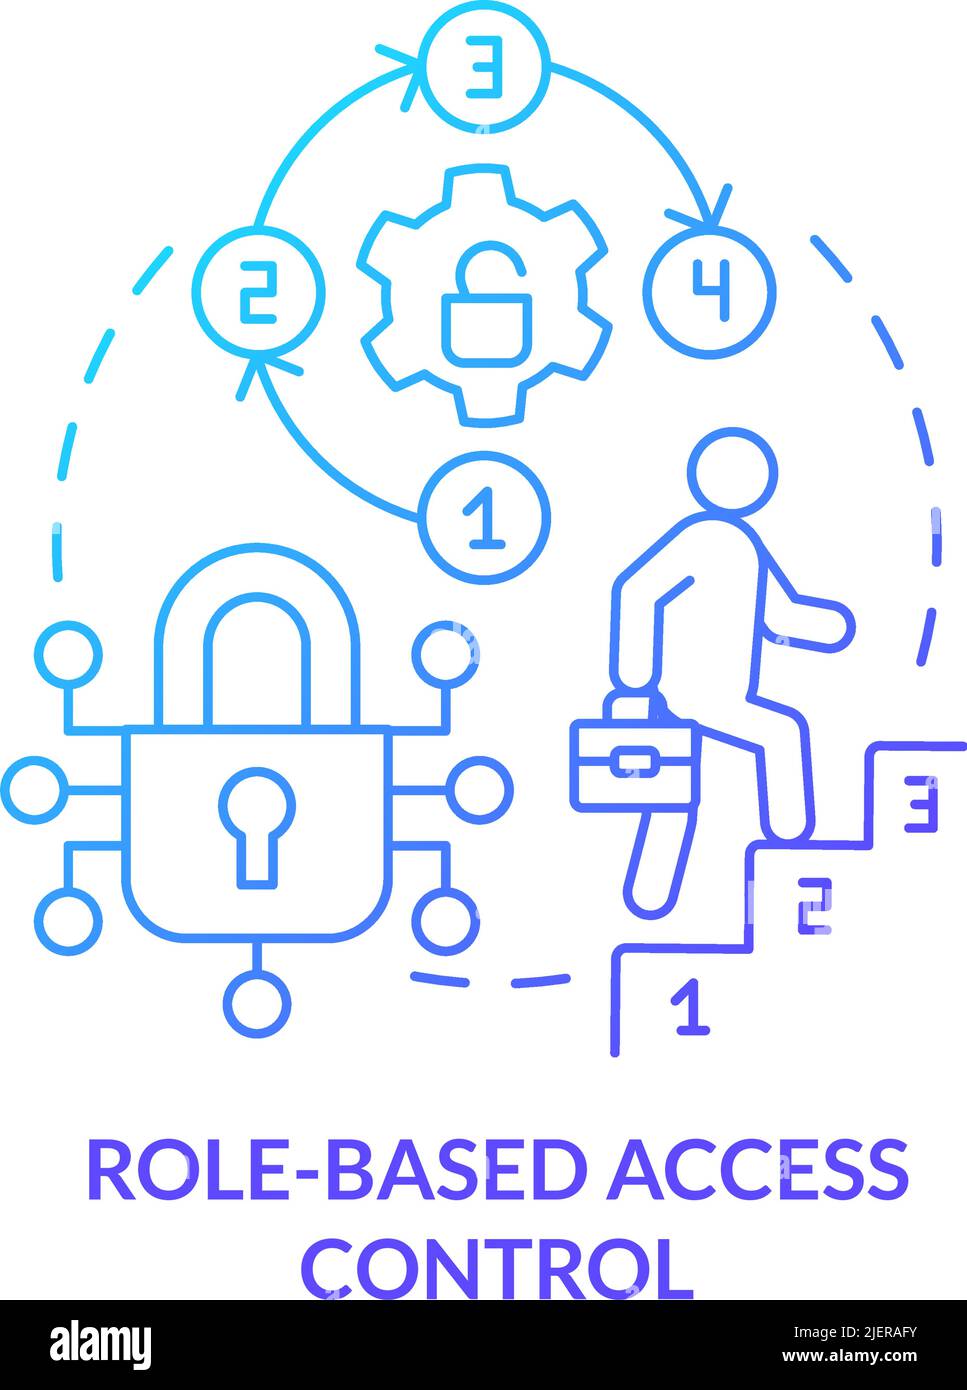 Role-based access control blue gradient concept icon Stock Vector